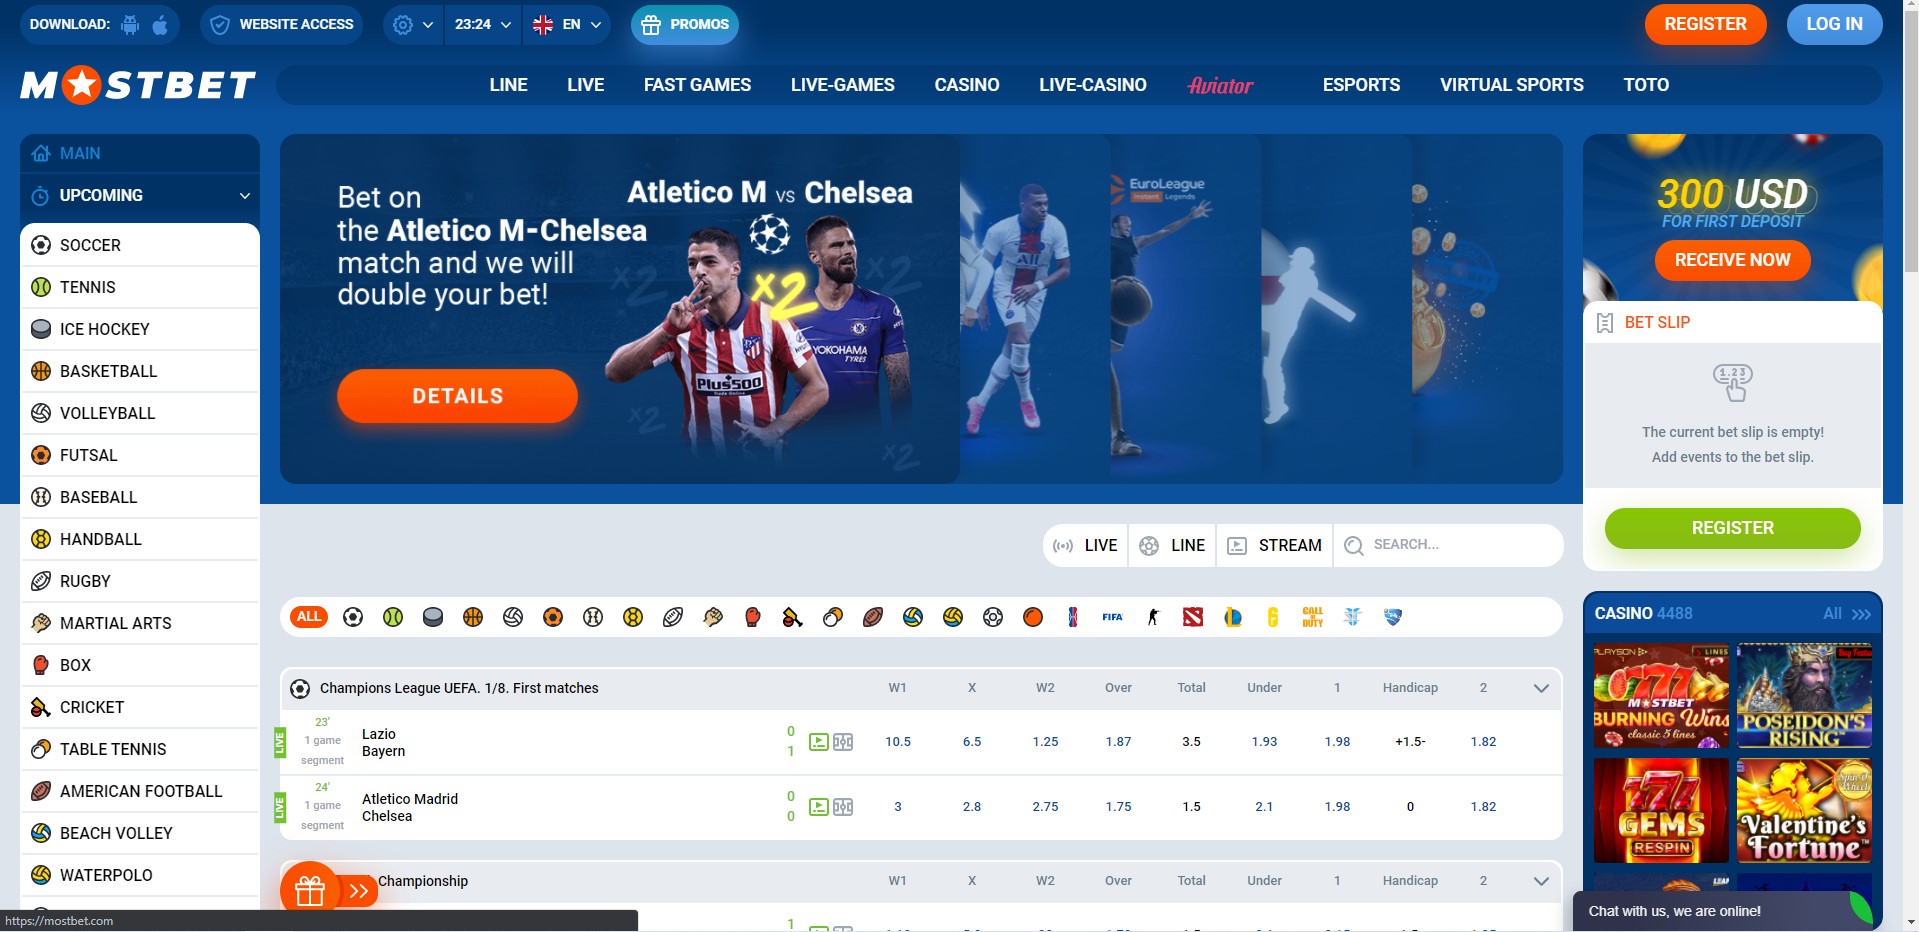 Top 10 Websites To Look For Mostbet online sports betting